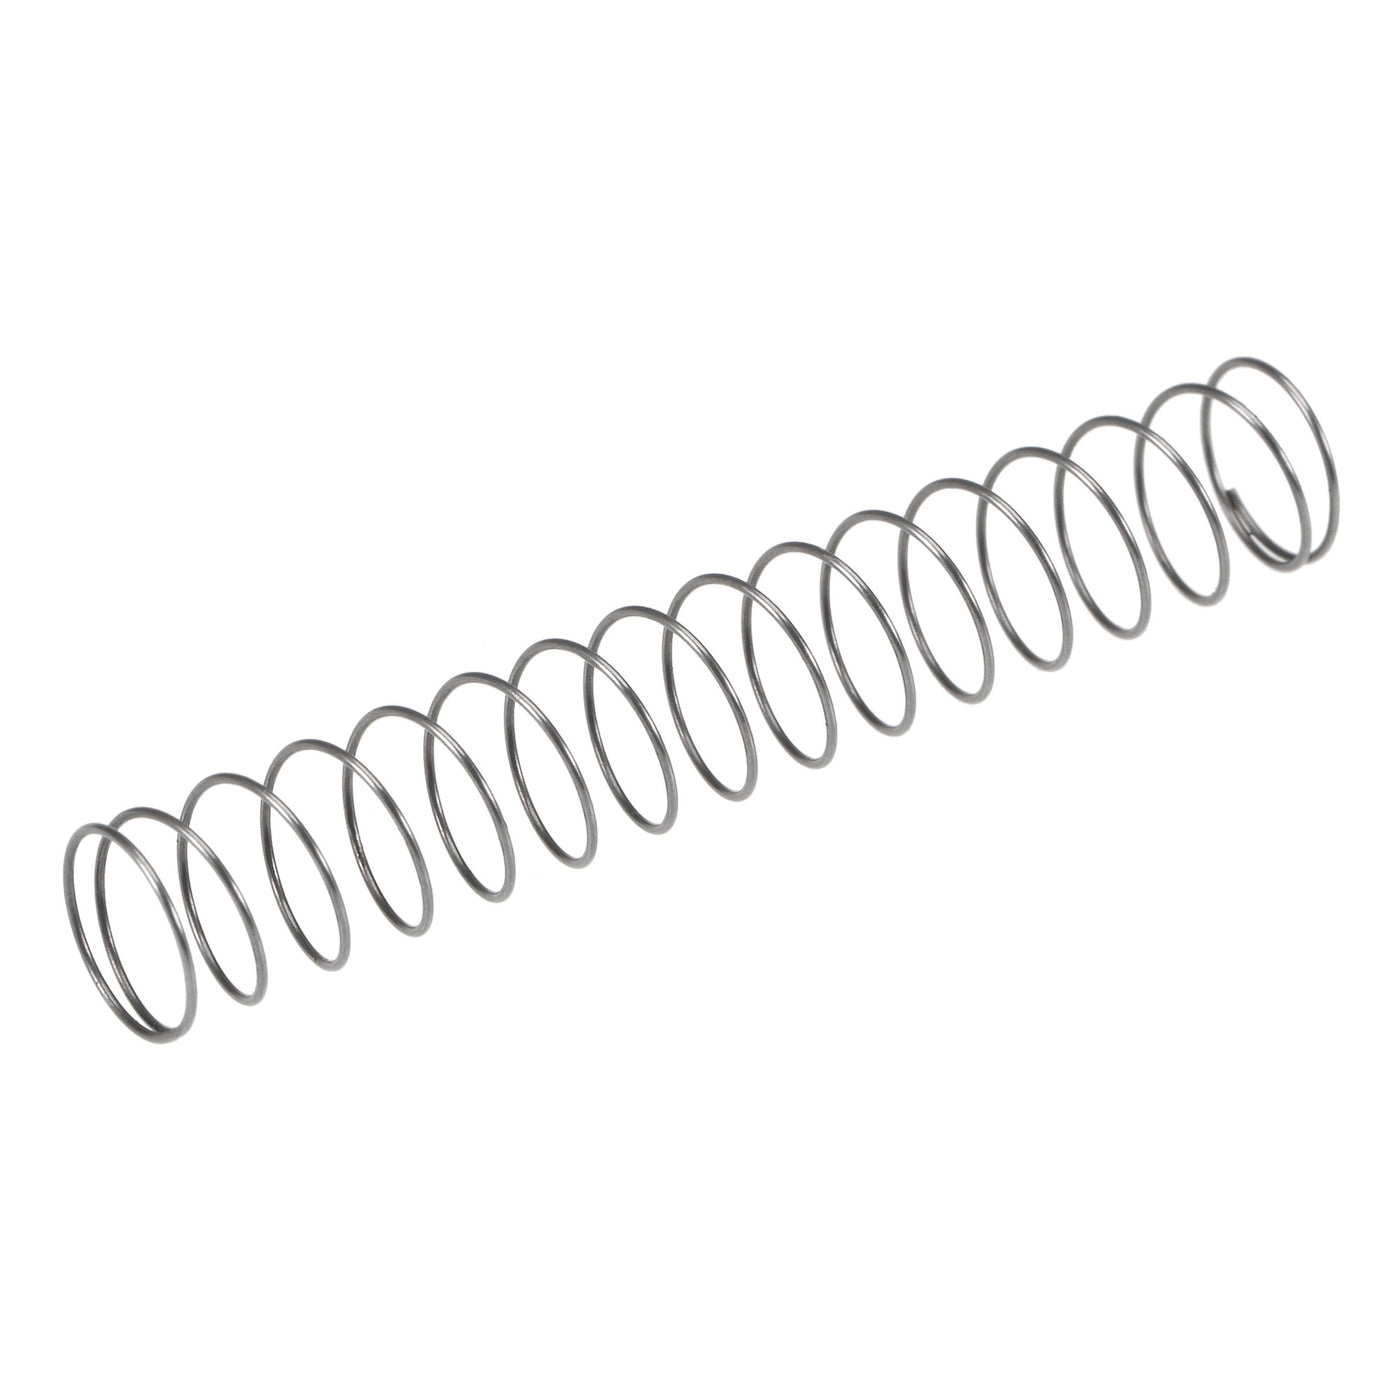 uxcell Uxcell Compressed Spring,8mmx0.4mmx50mm Free Length,1.1N Load Capacity,Gray,30pcs